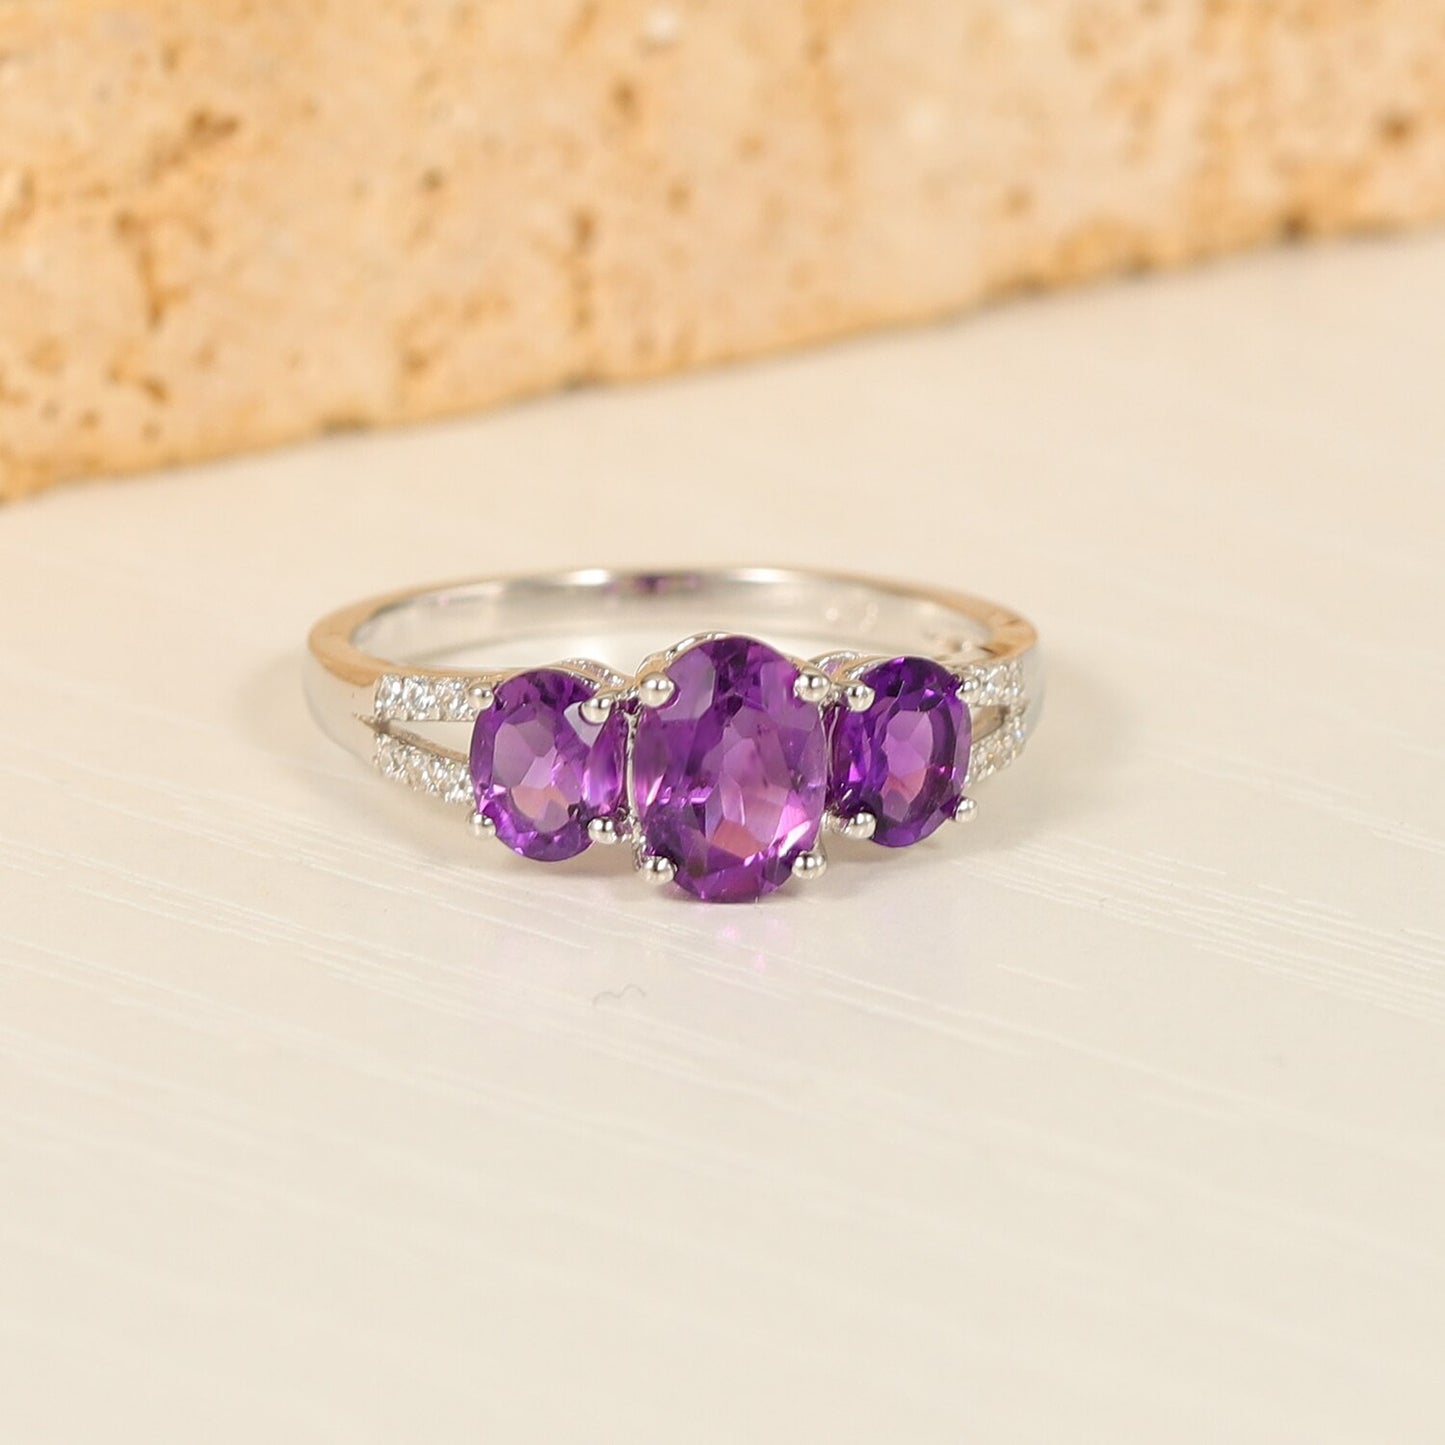 GEM&#39;S BALLET Sapphire Gemstone Rings Natural Blue Sapphire Three Stone Engagement Rings in 925 Sterling Silver Gift For Her Amethyst|925 Sterling Silver